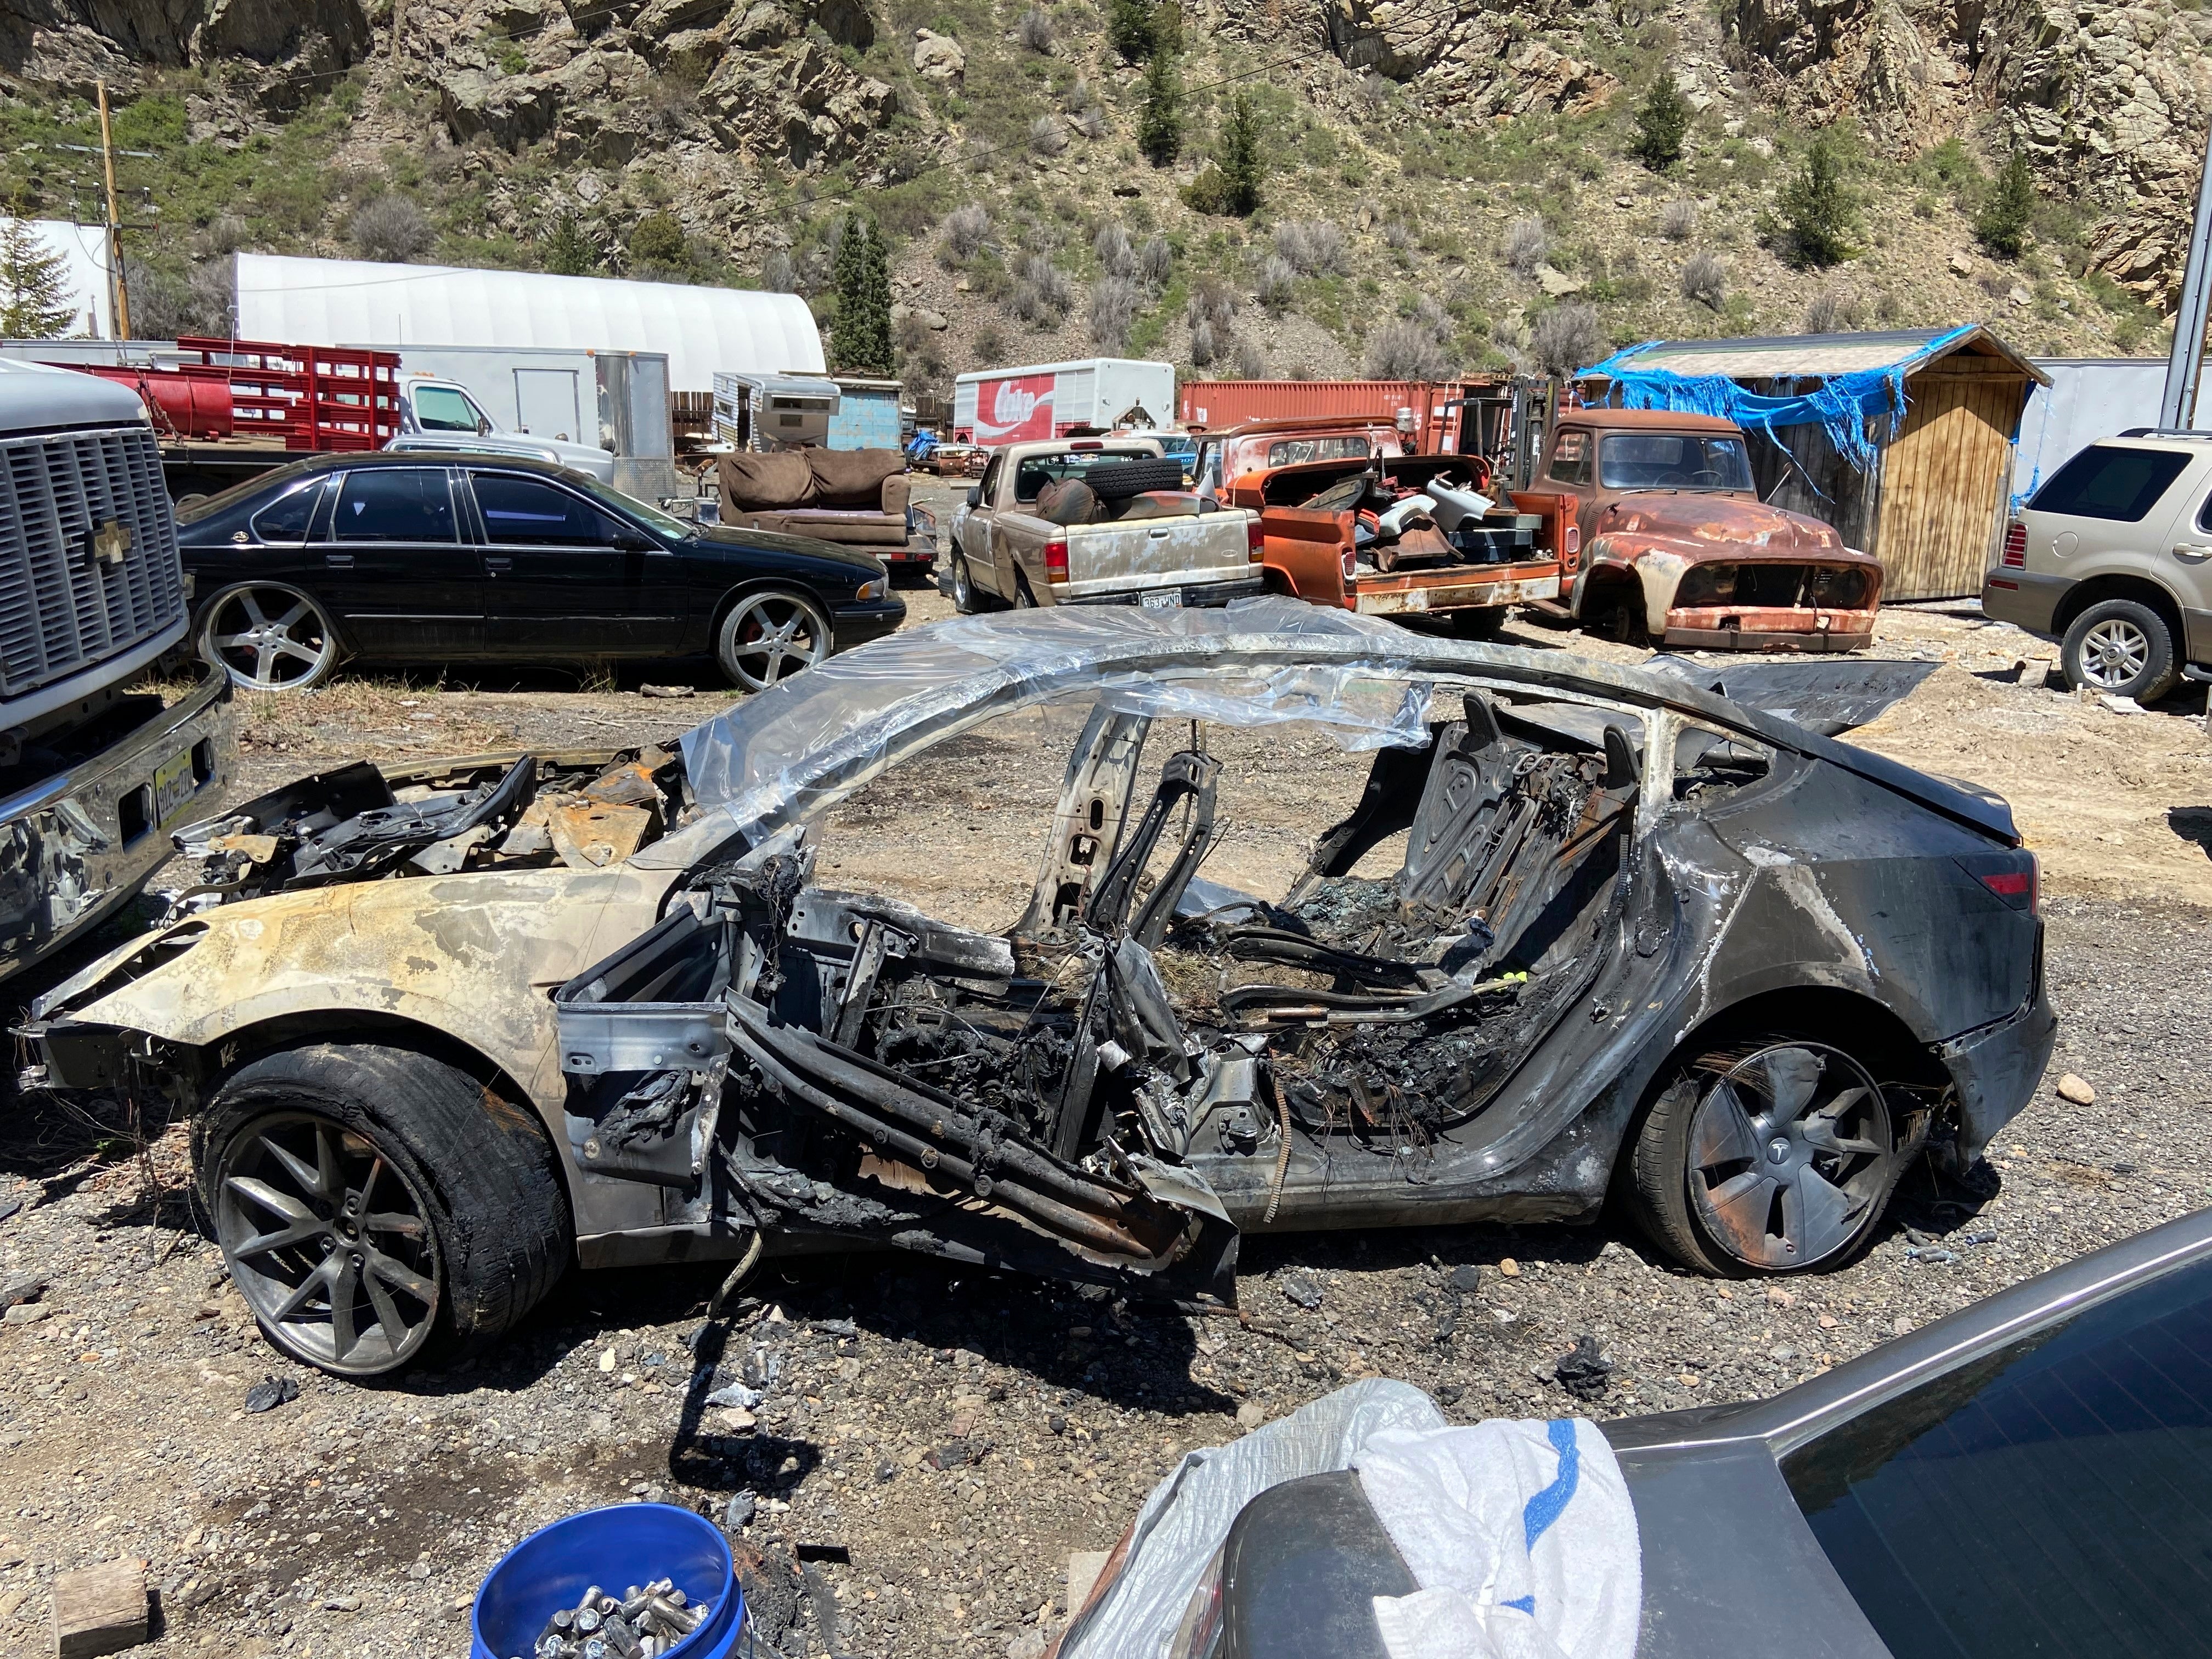 This image provided by Colorado State Patrol shows a Tesla Model 3 that crashed on May 16, 2022 in Clear Creek County, Colo. The widow of a man who died after his Tesla veered off the road and crashed into a tree while he was using its partially automated driving system in Colorado in 2022 is suing the car maker